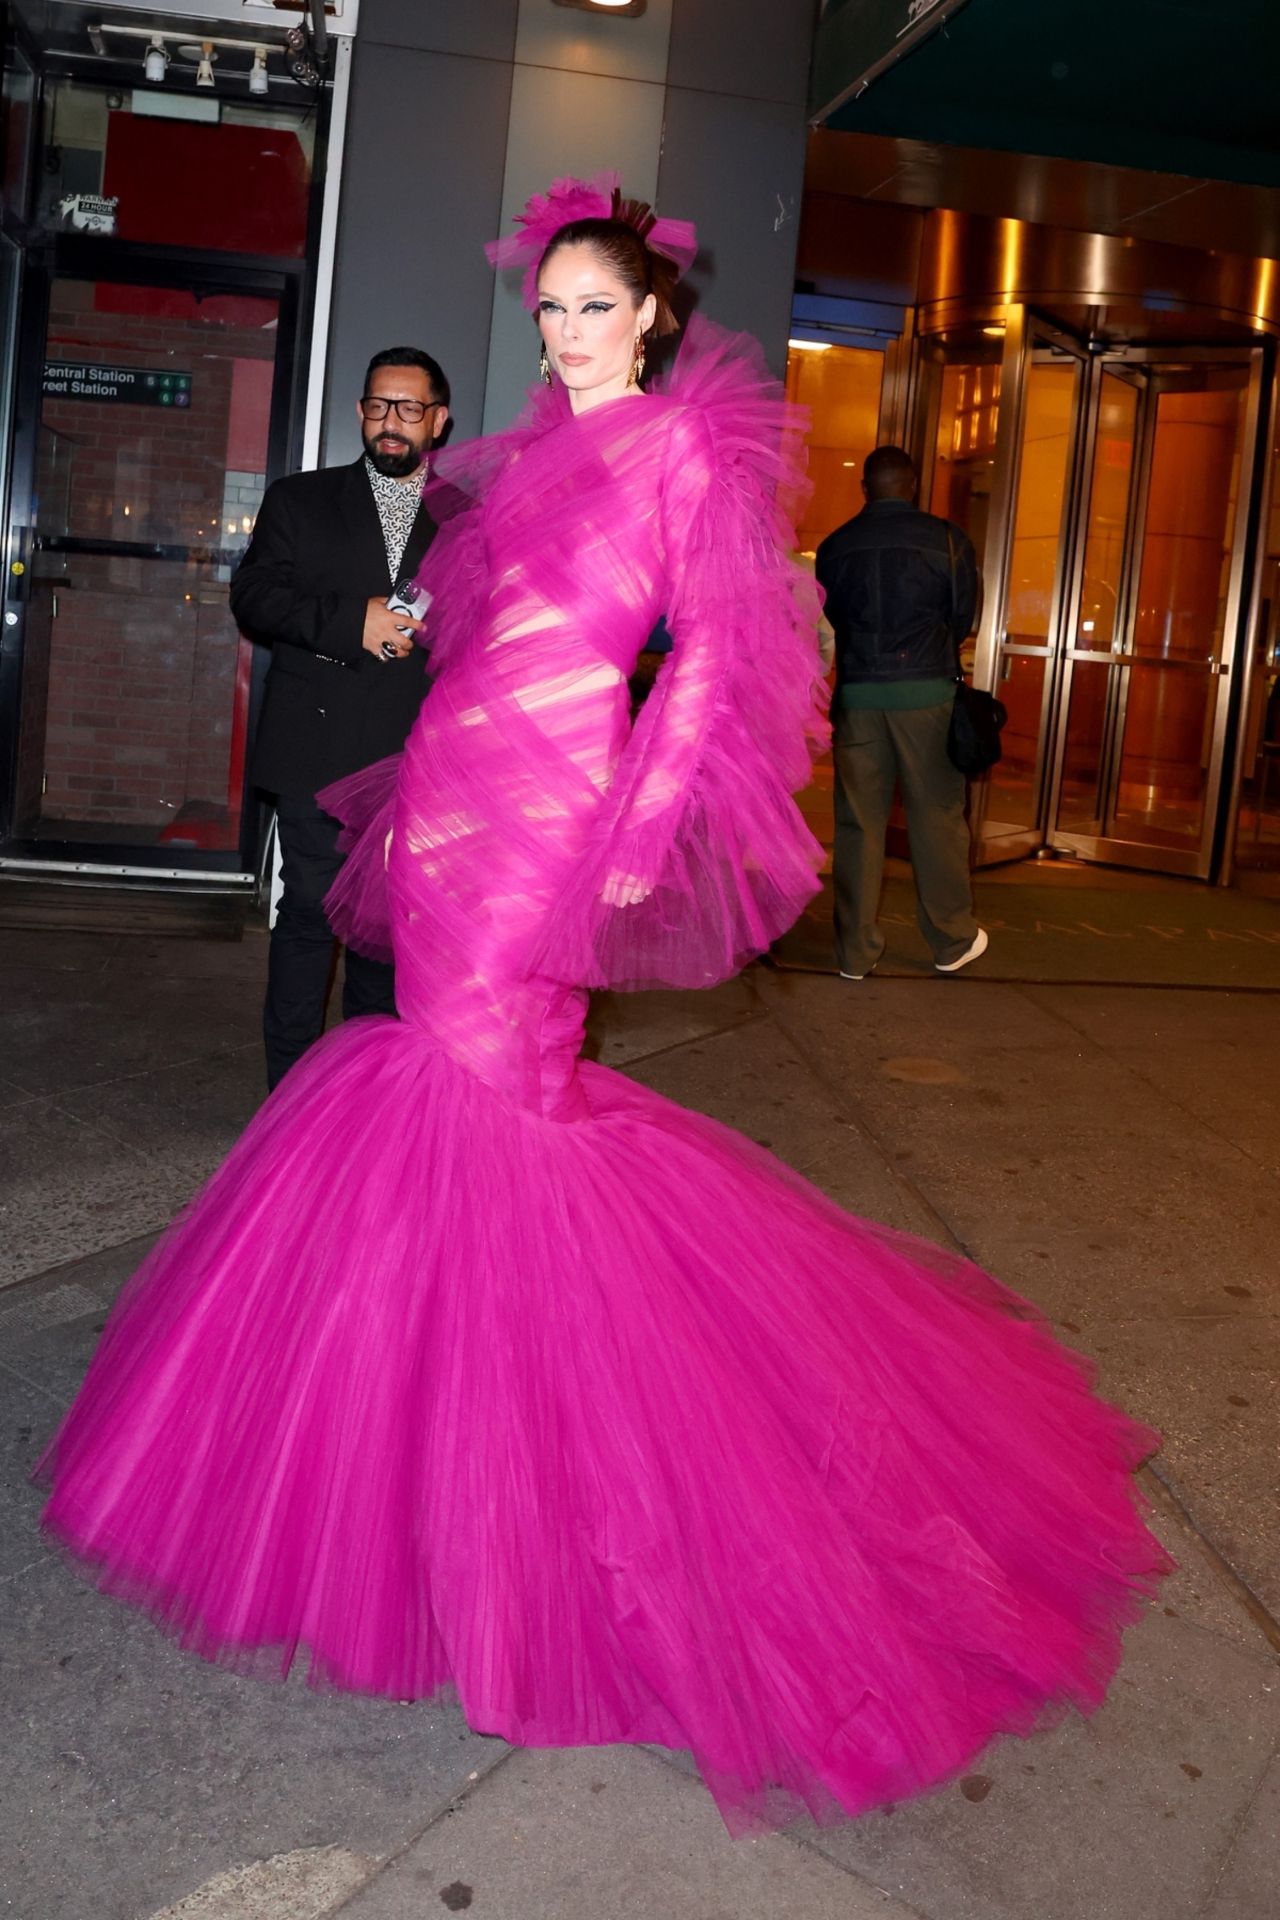 COCO ROCHA AT THE THE MULBERRY BAR FOR A MET GALA AFTER PARTY IN NEW YORK3